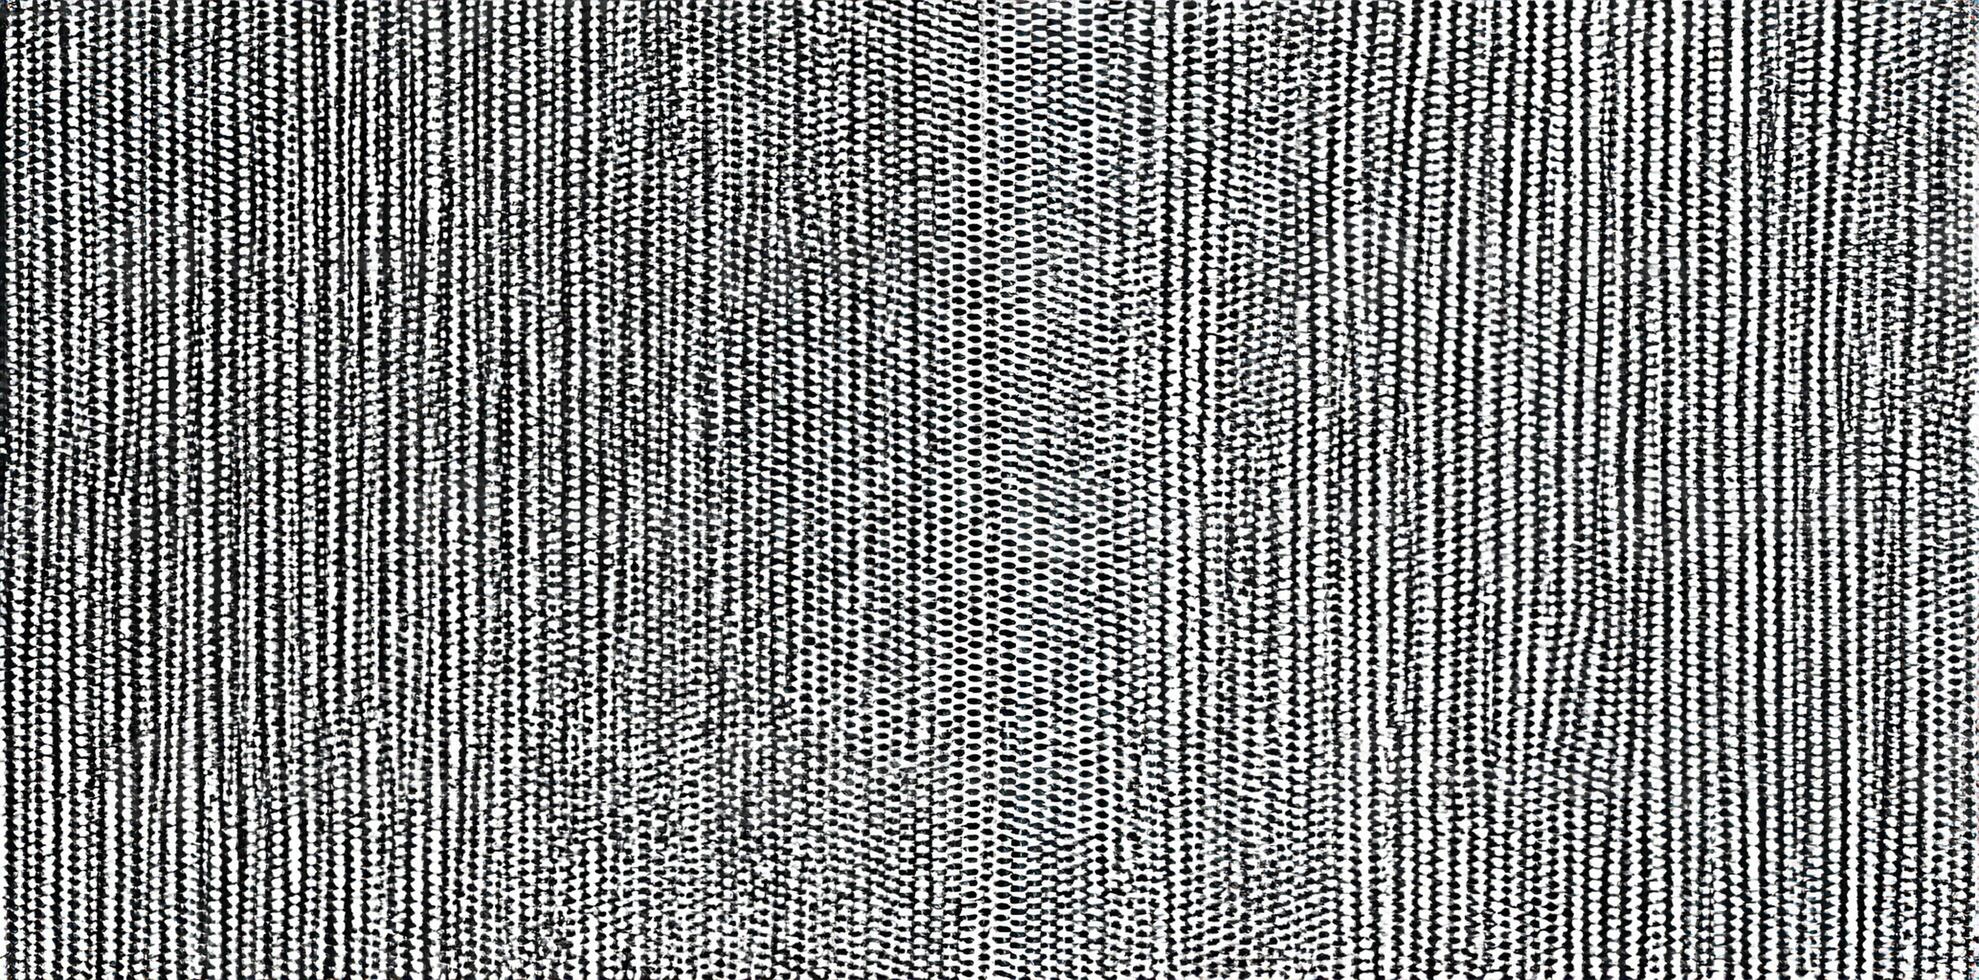 fabric texture. Distressed texture of weaving fabric. Grunge background. Abstract halftone. Overlay to create interesting effect and depth. Black isolated on white. photo